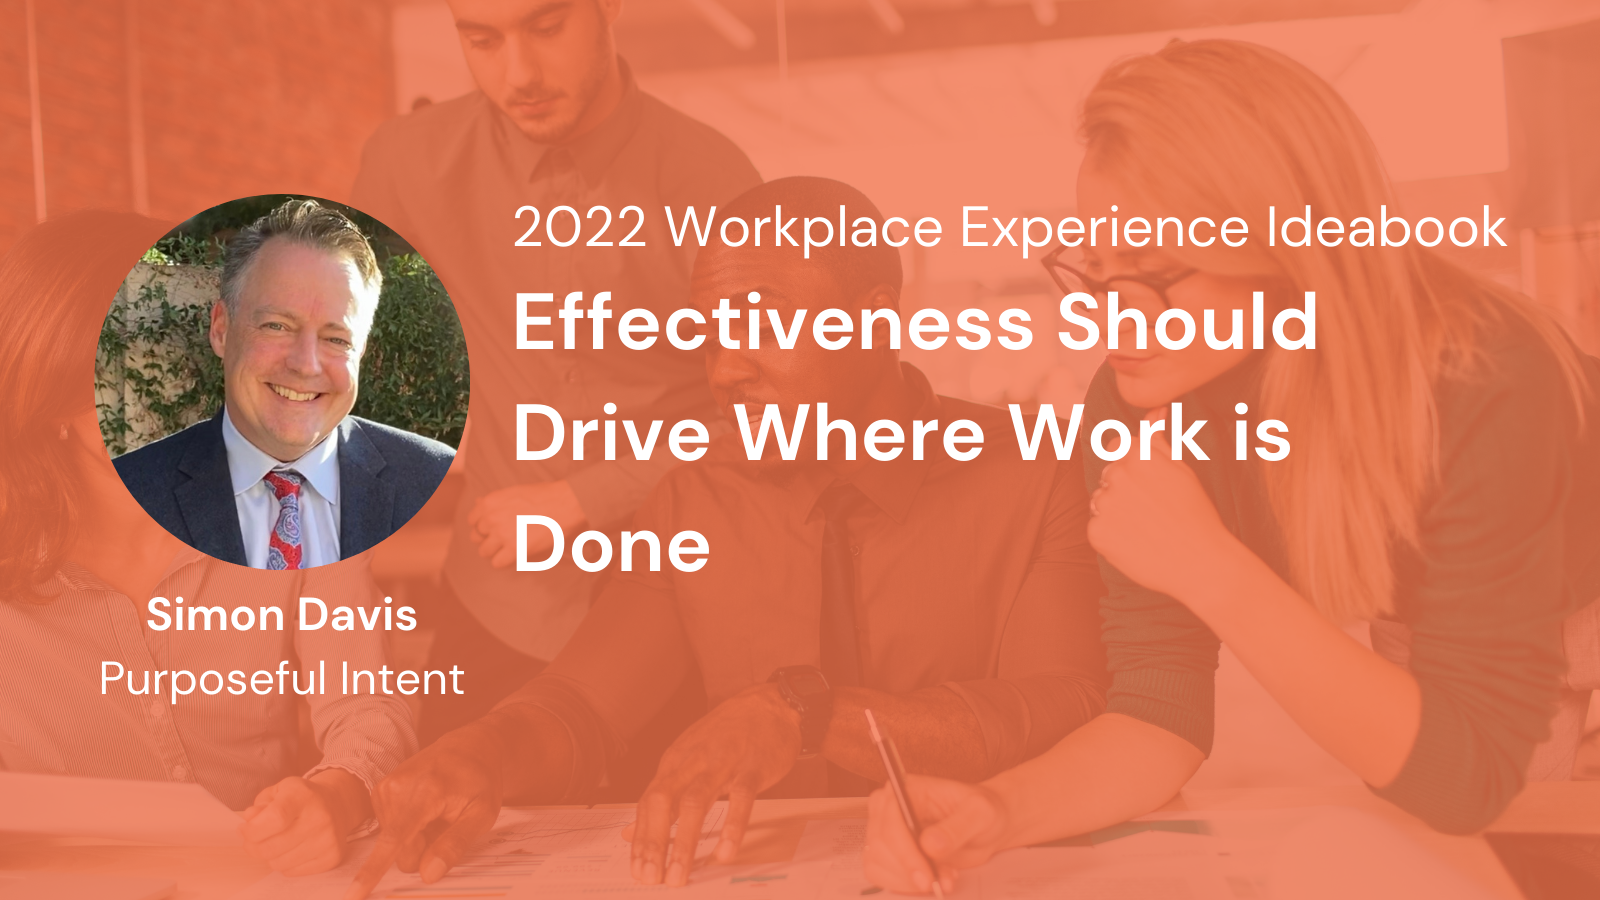 Effectiveness Should Drive Where Work is Done